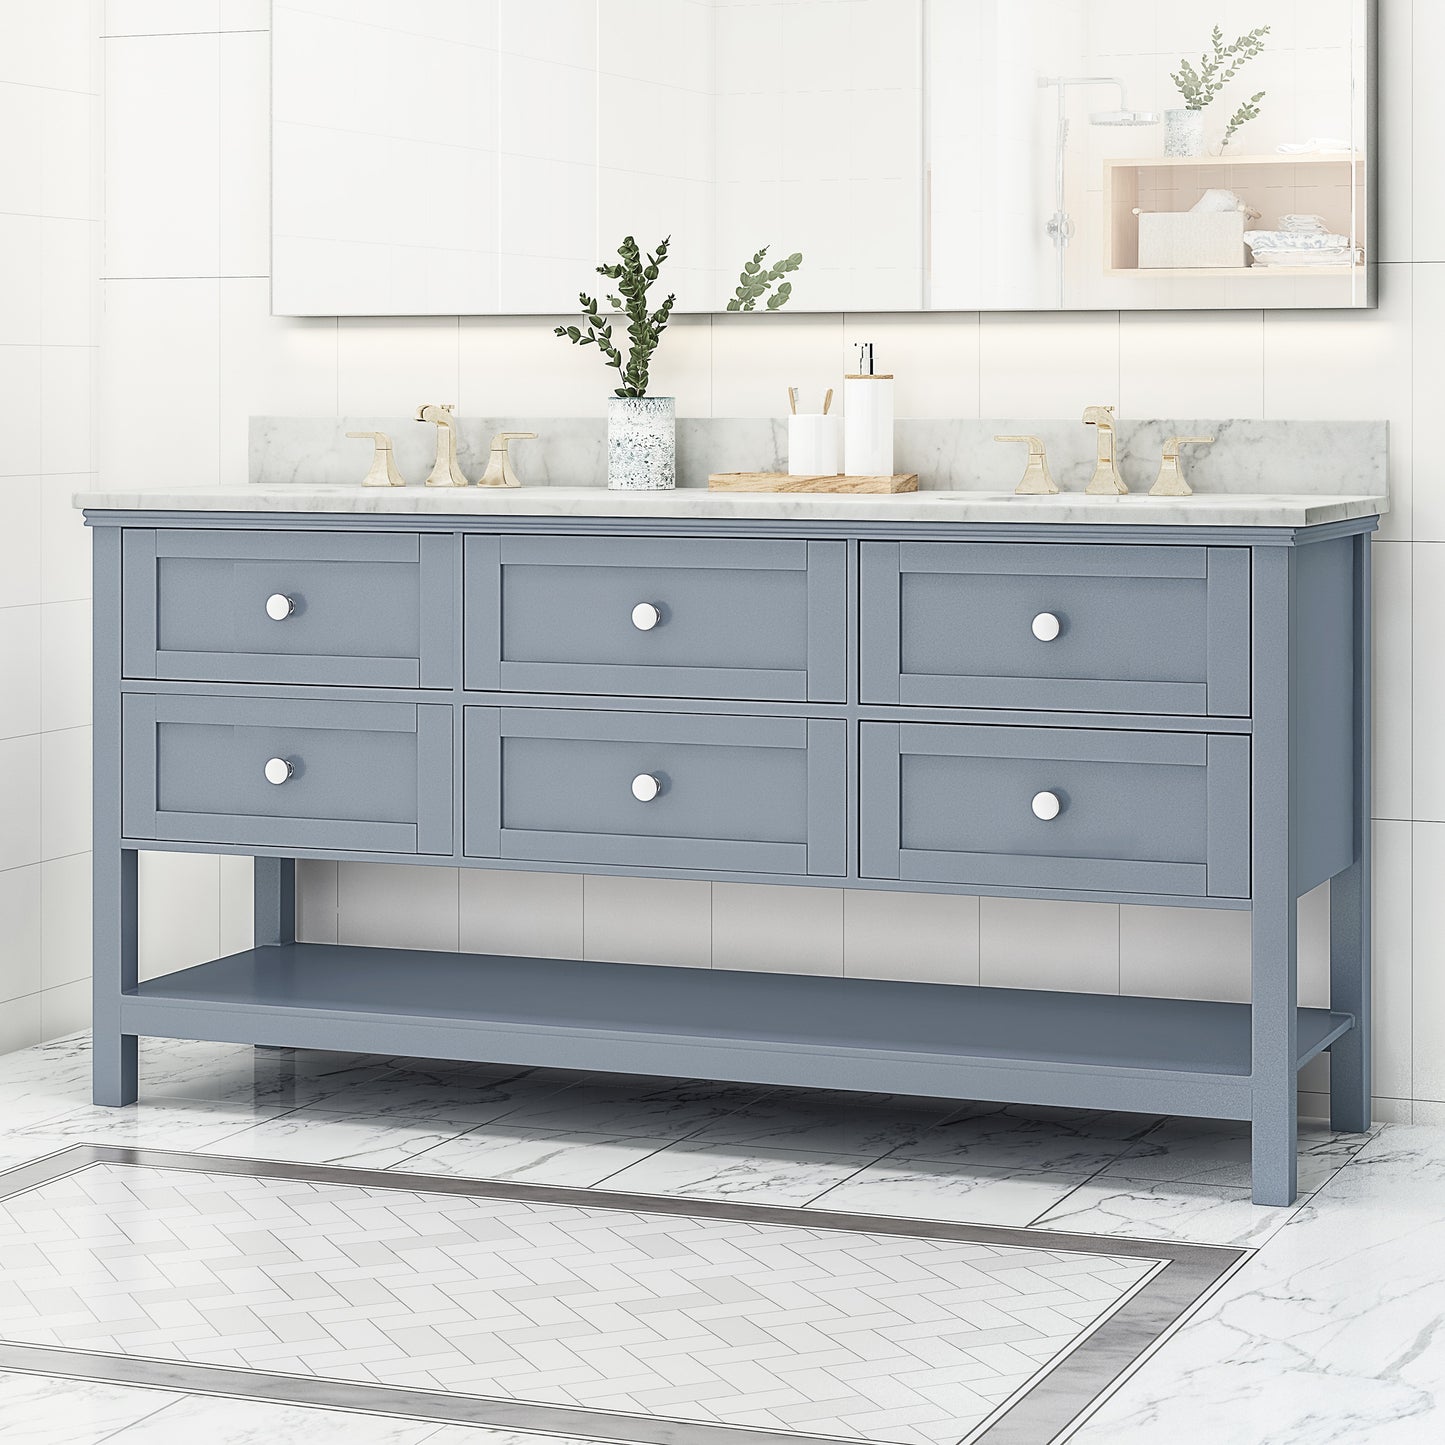 Douvier Contemporary 72" Wood Bathroom Vanity (Counter Top Not Included)